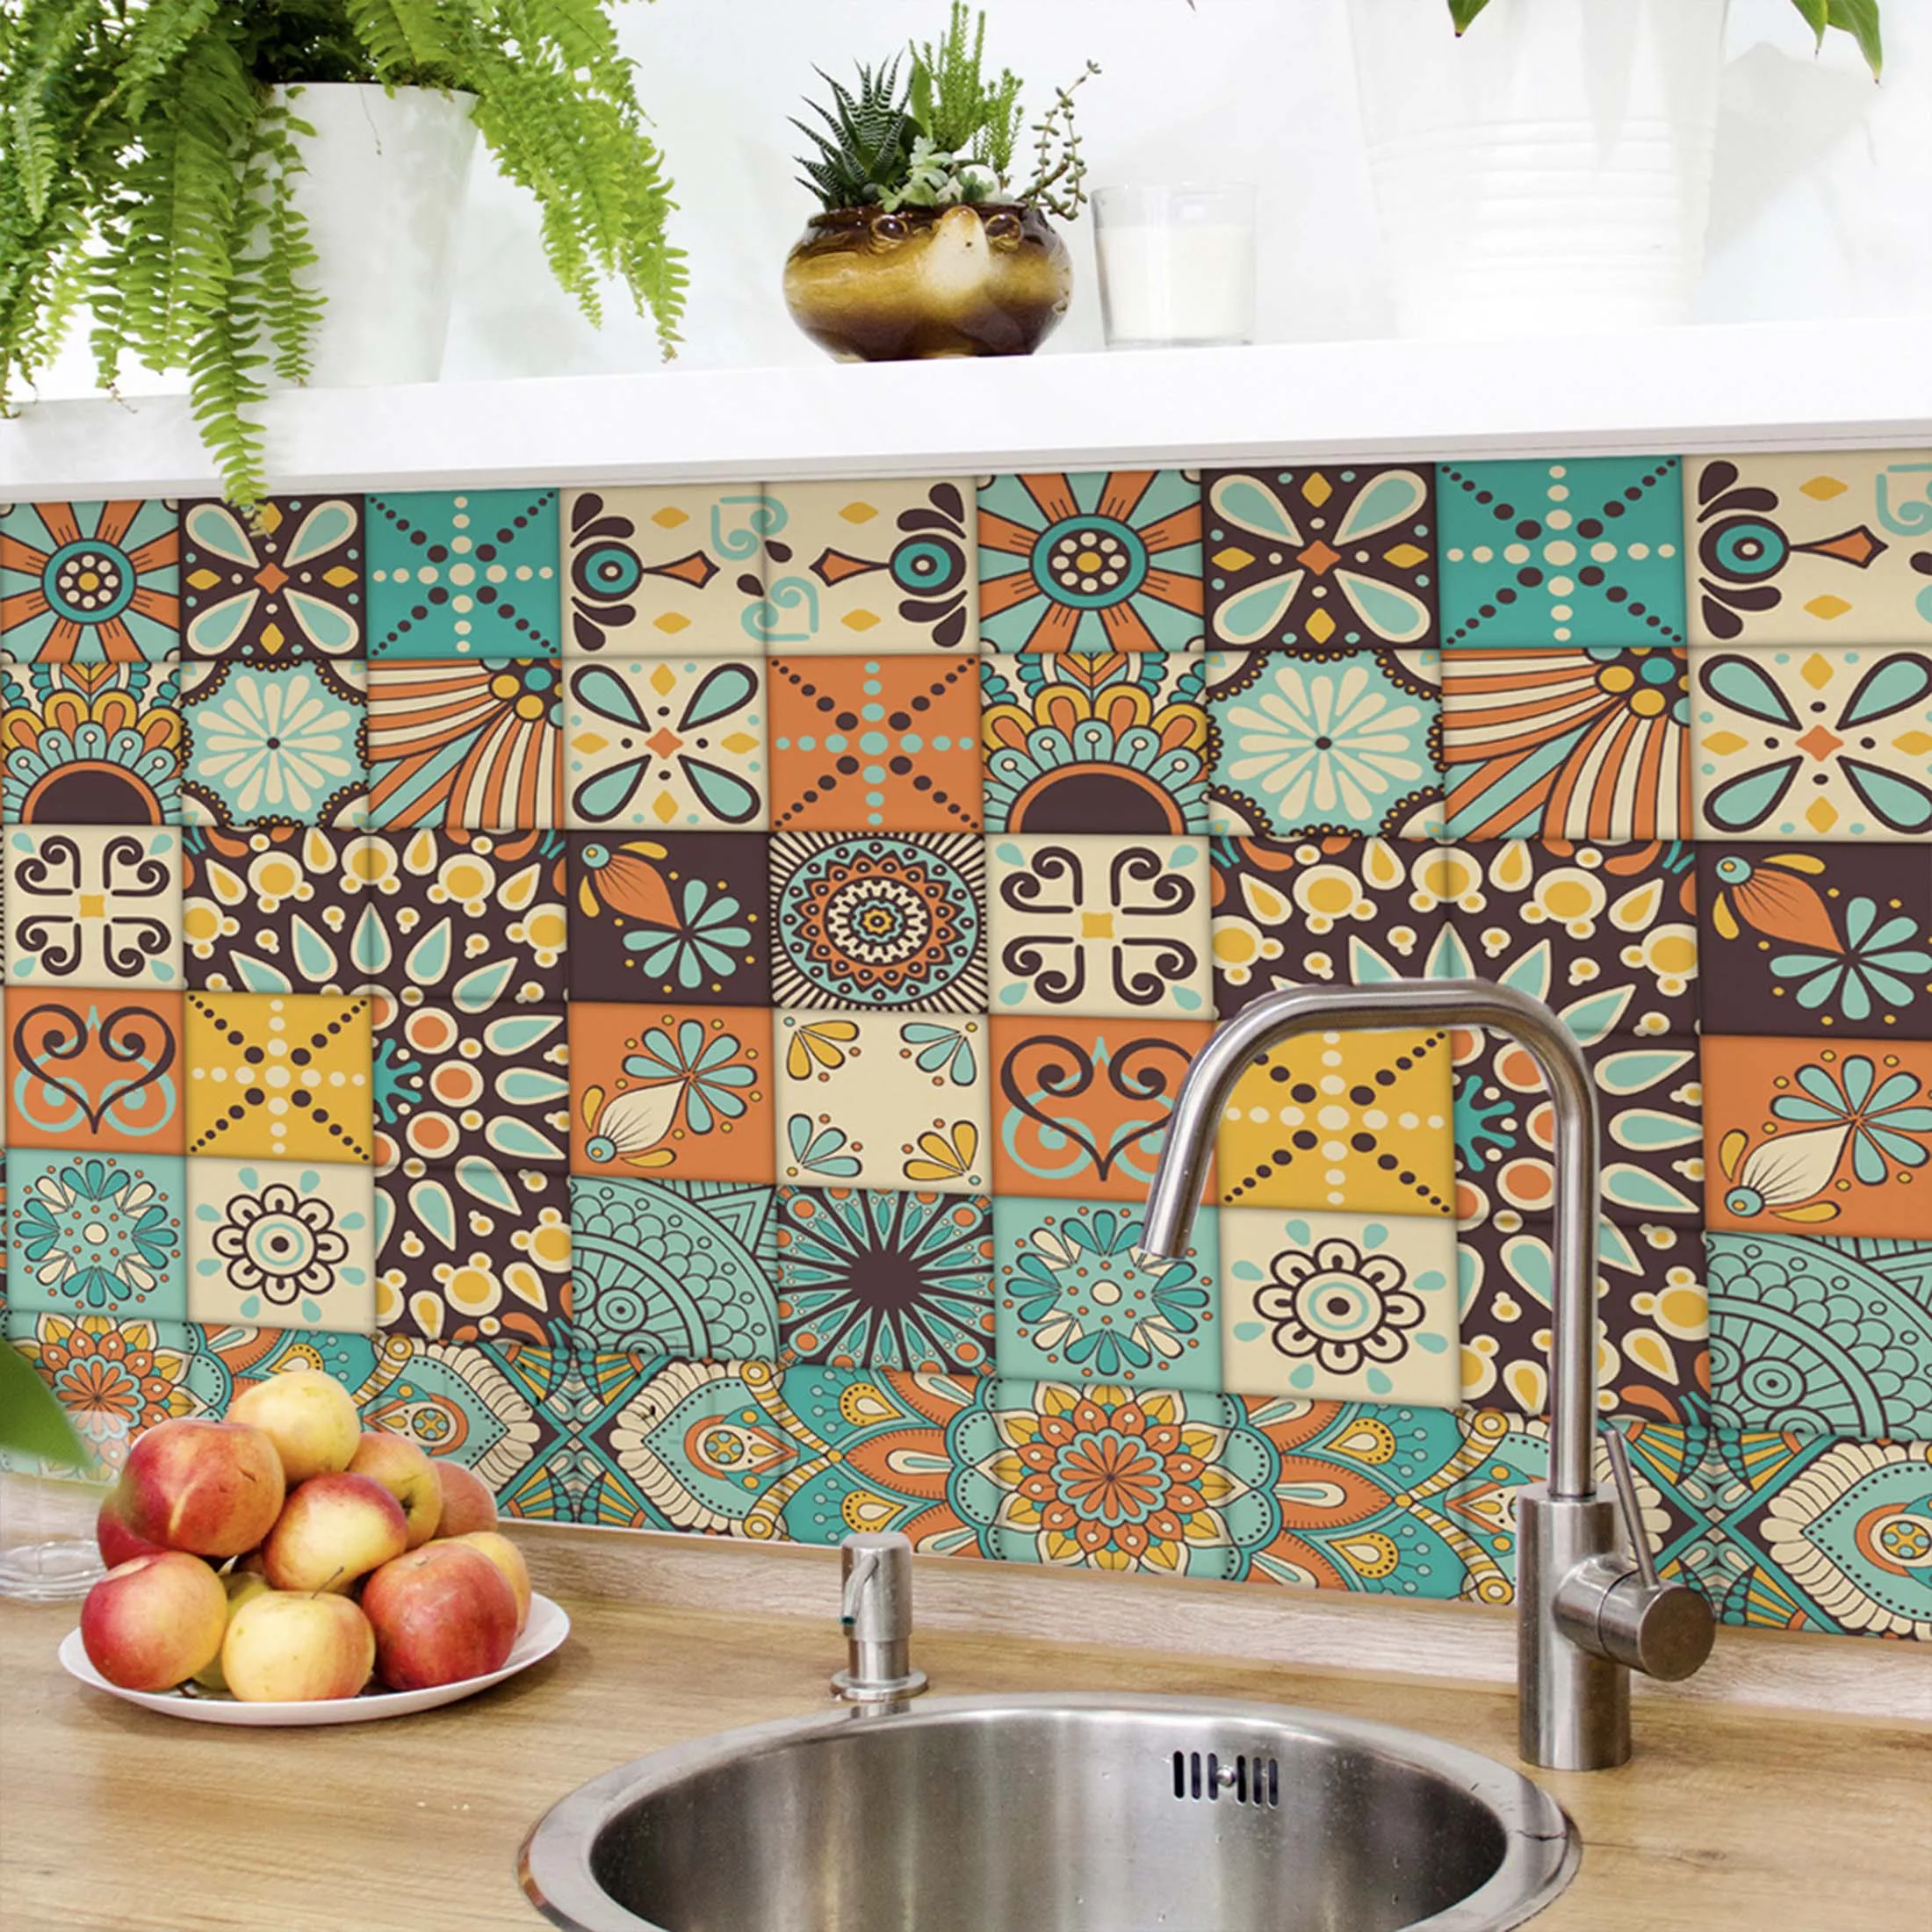 

Wallpaper Home Decoration Colorful Floral Mosaic Boho Magnet Cover Decal Wall Sticker for Home Bedroom Kitchen Cabinets